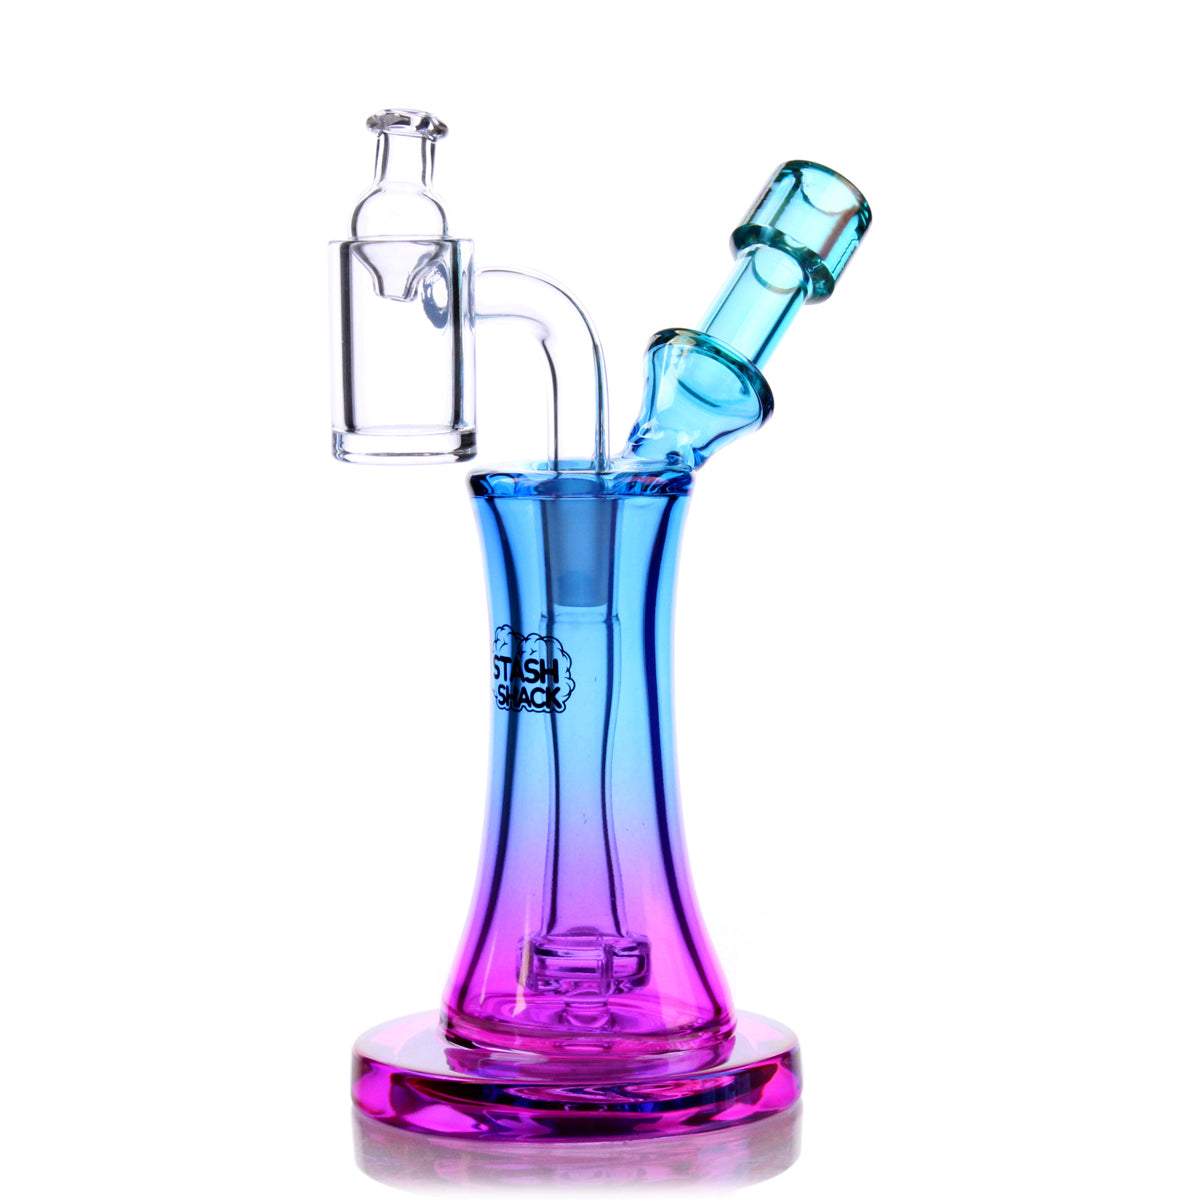 Aurelia Mini Rig by The Stash Shack, compact borosilicate glass dab rig with a 90-degree joint, in gradient blue to pink color.